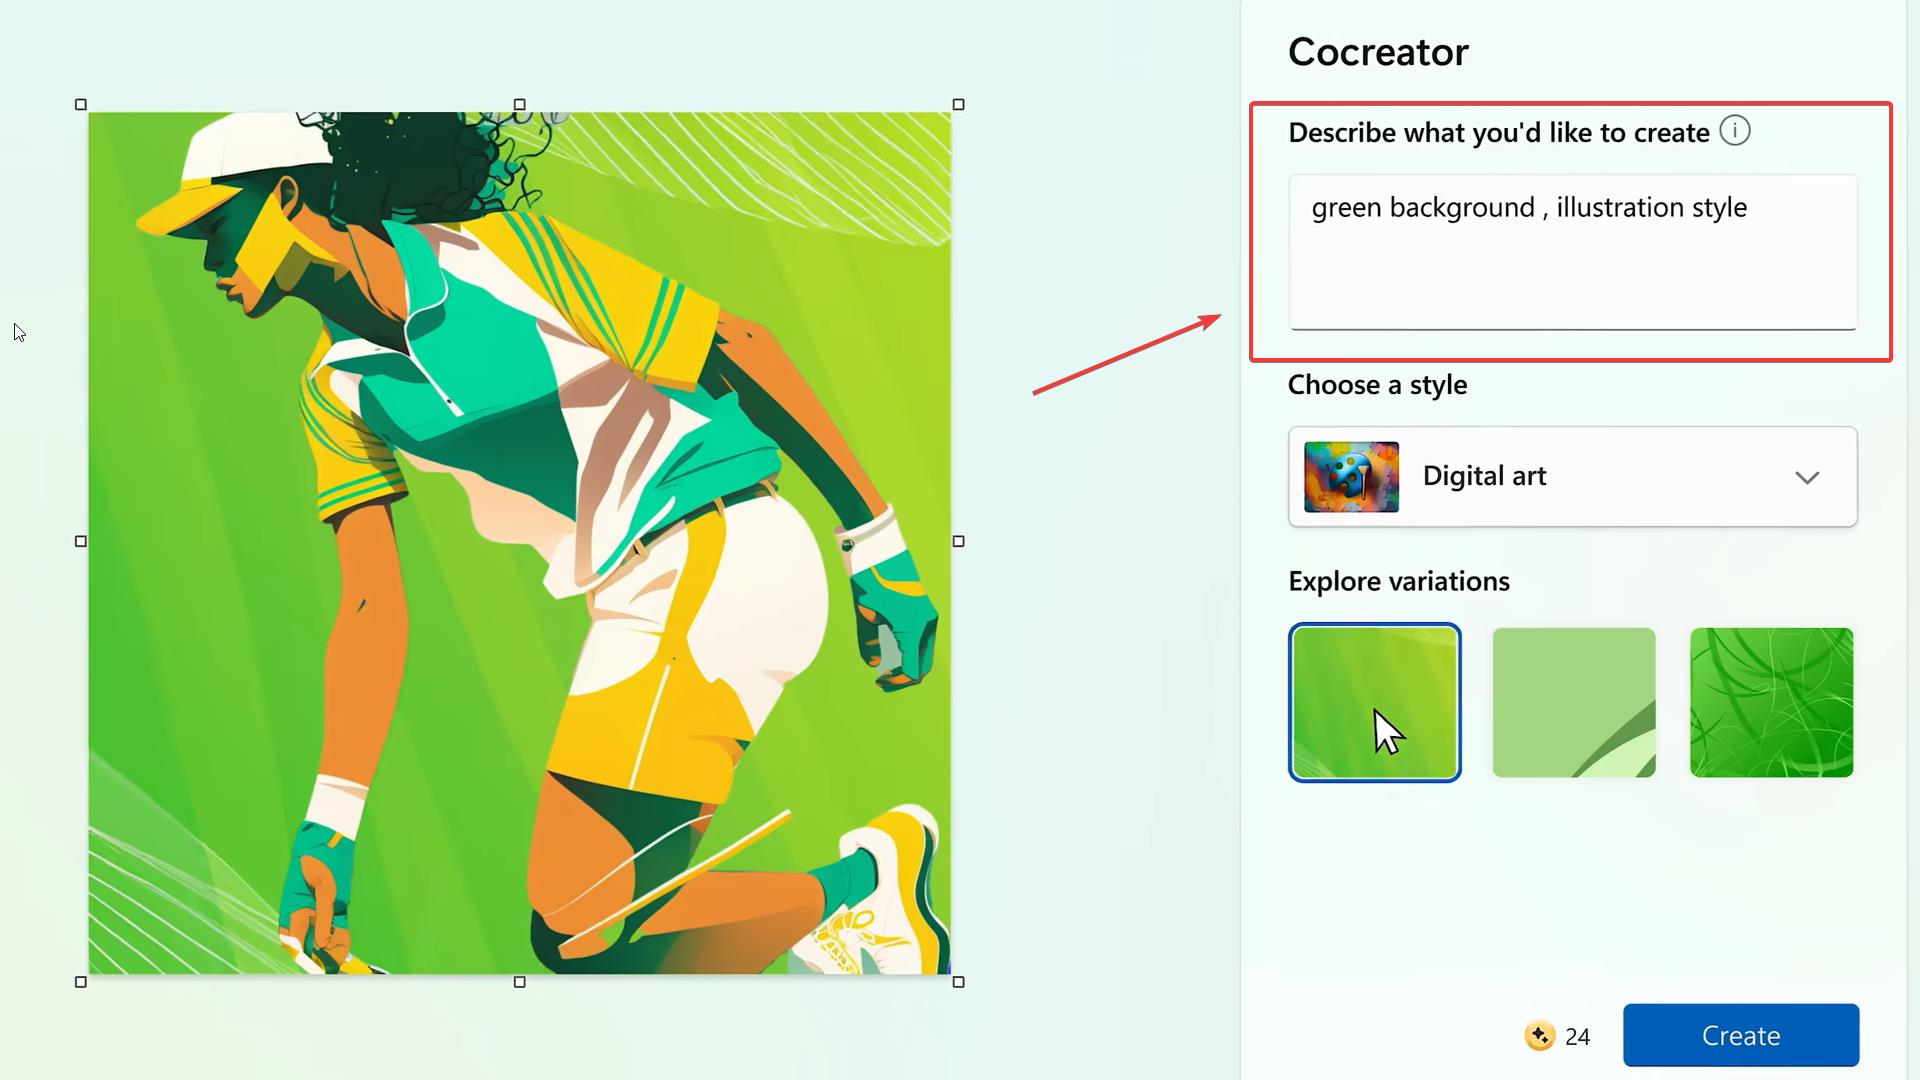 how to use cocreator in paint